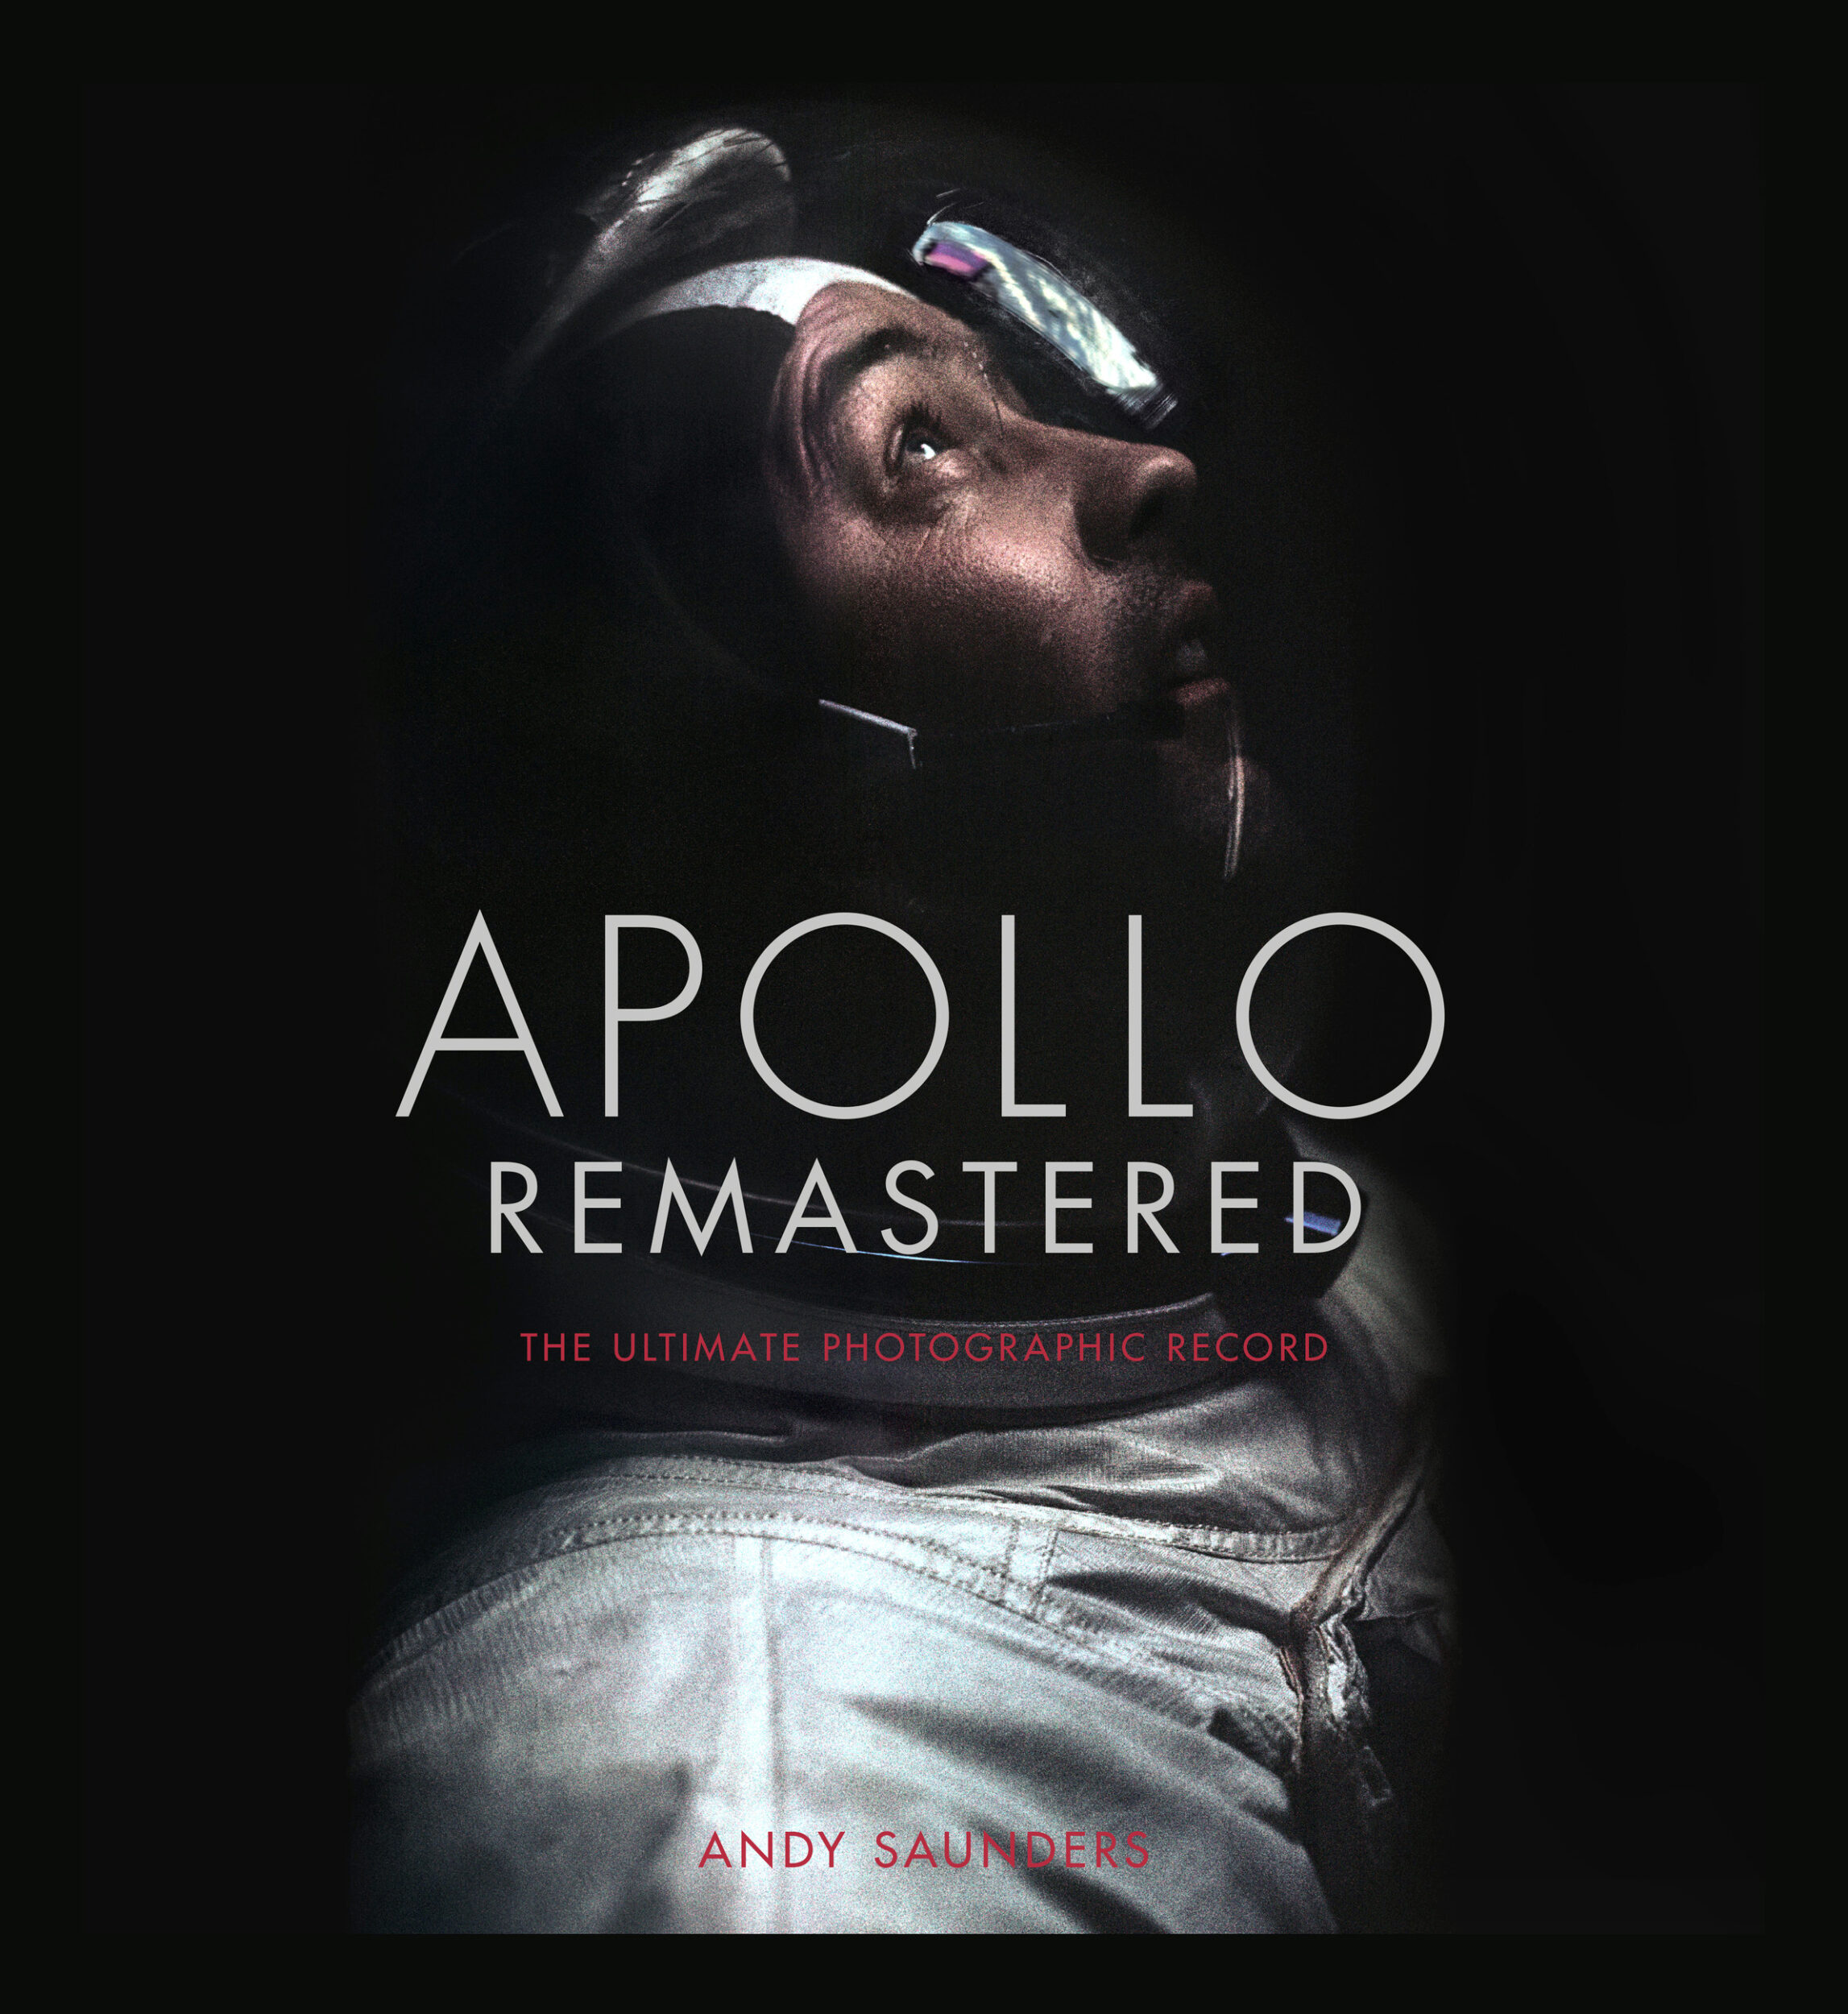 Andy Saunders' Apollo Remastered book cover.